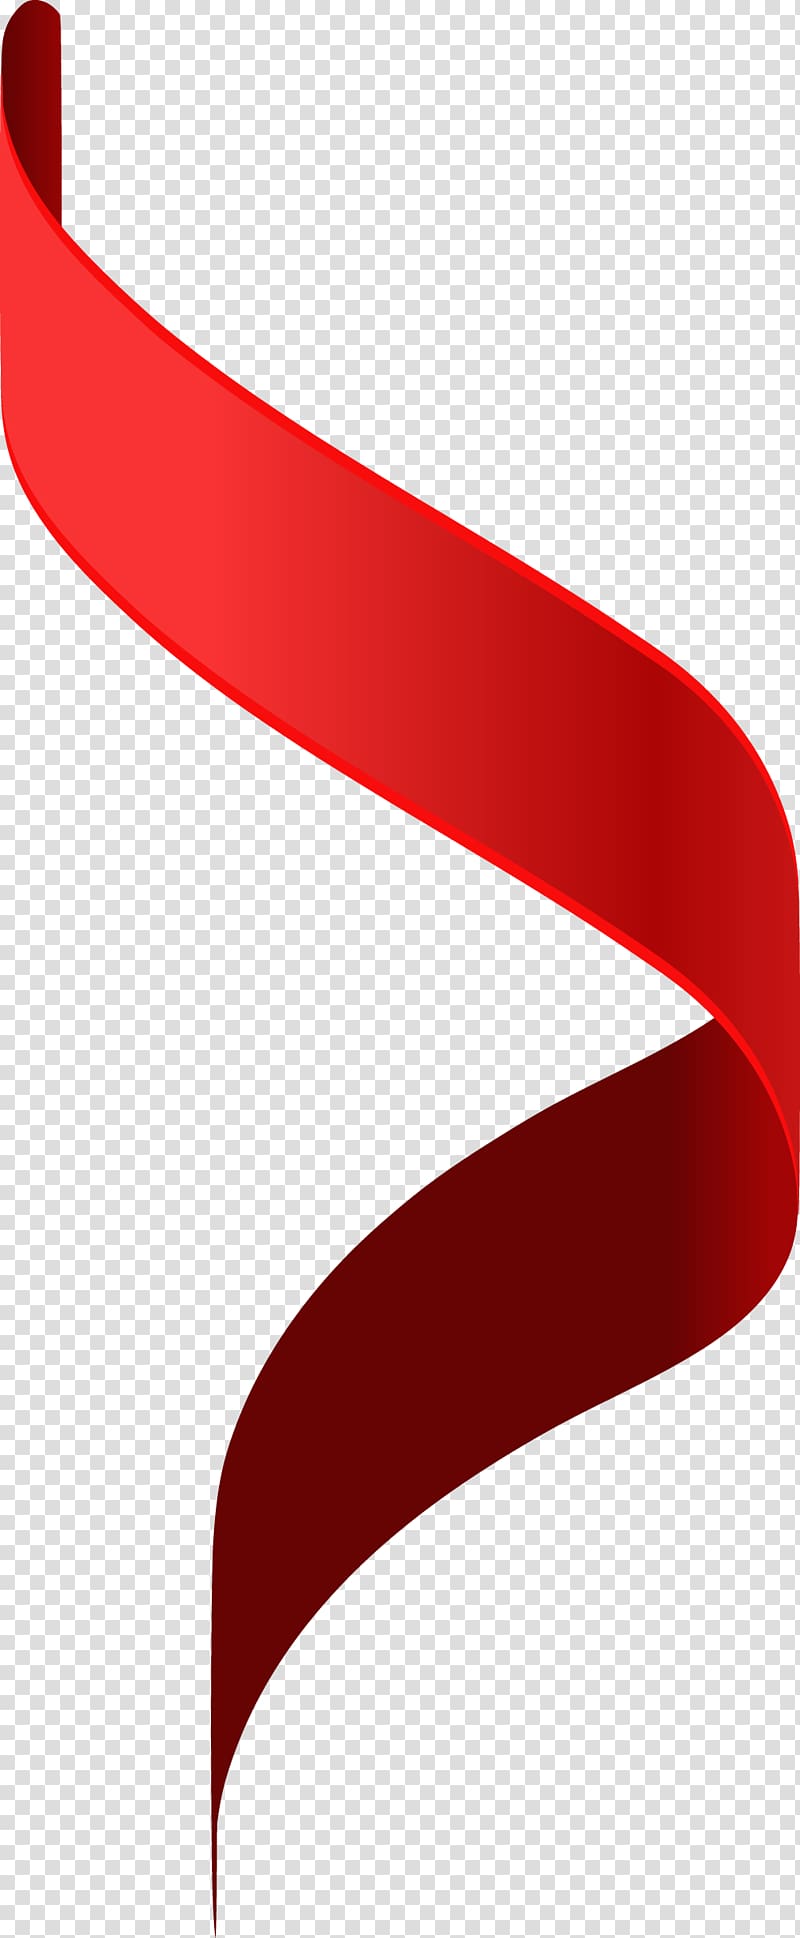 Red ribbon User interface, Red ribbon transparent background PNG clipart